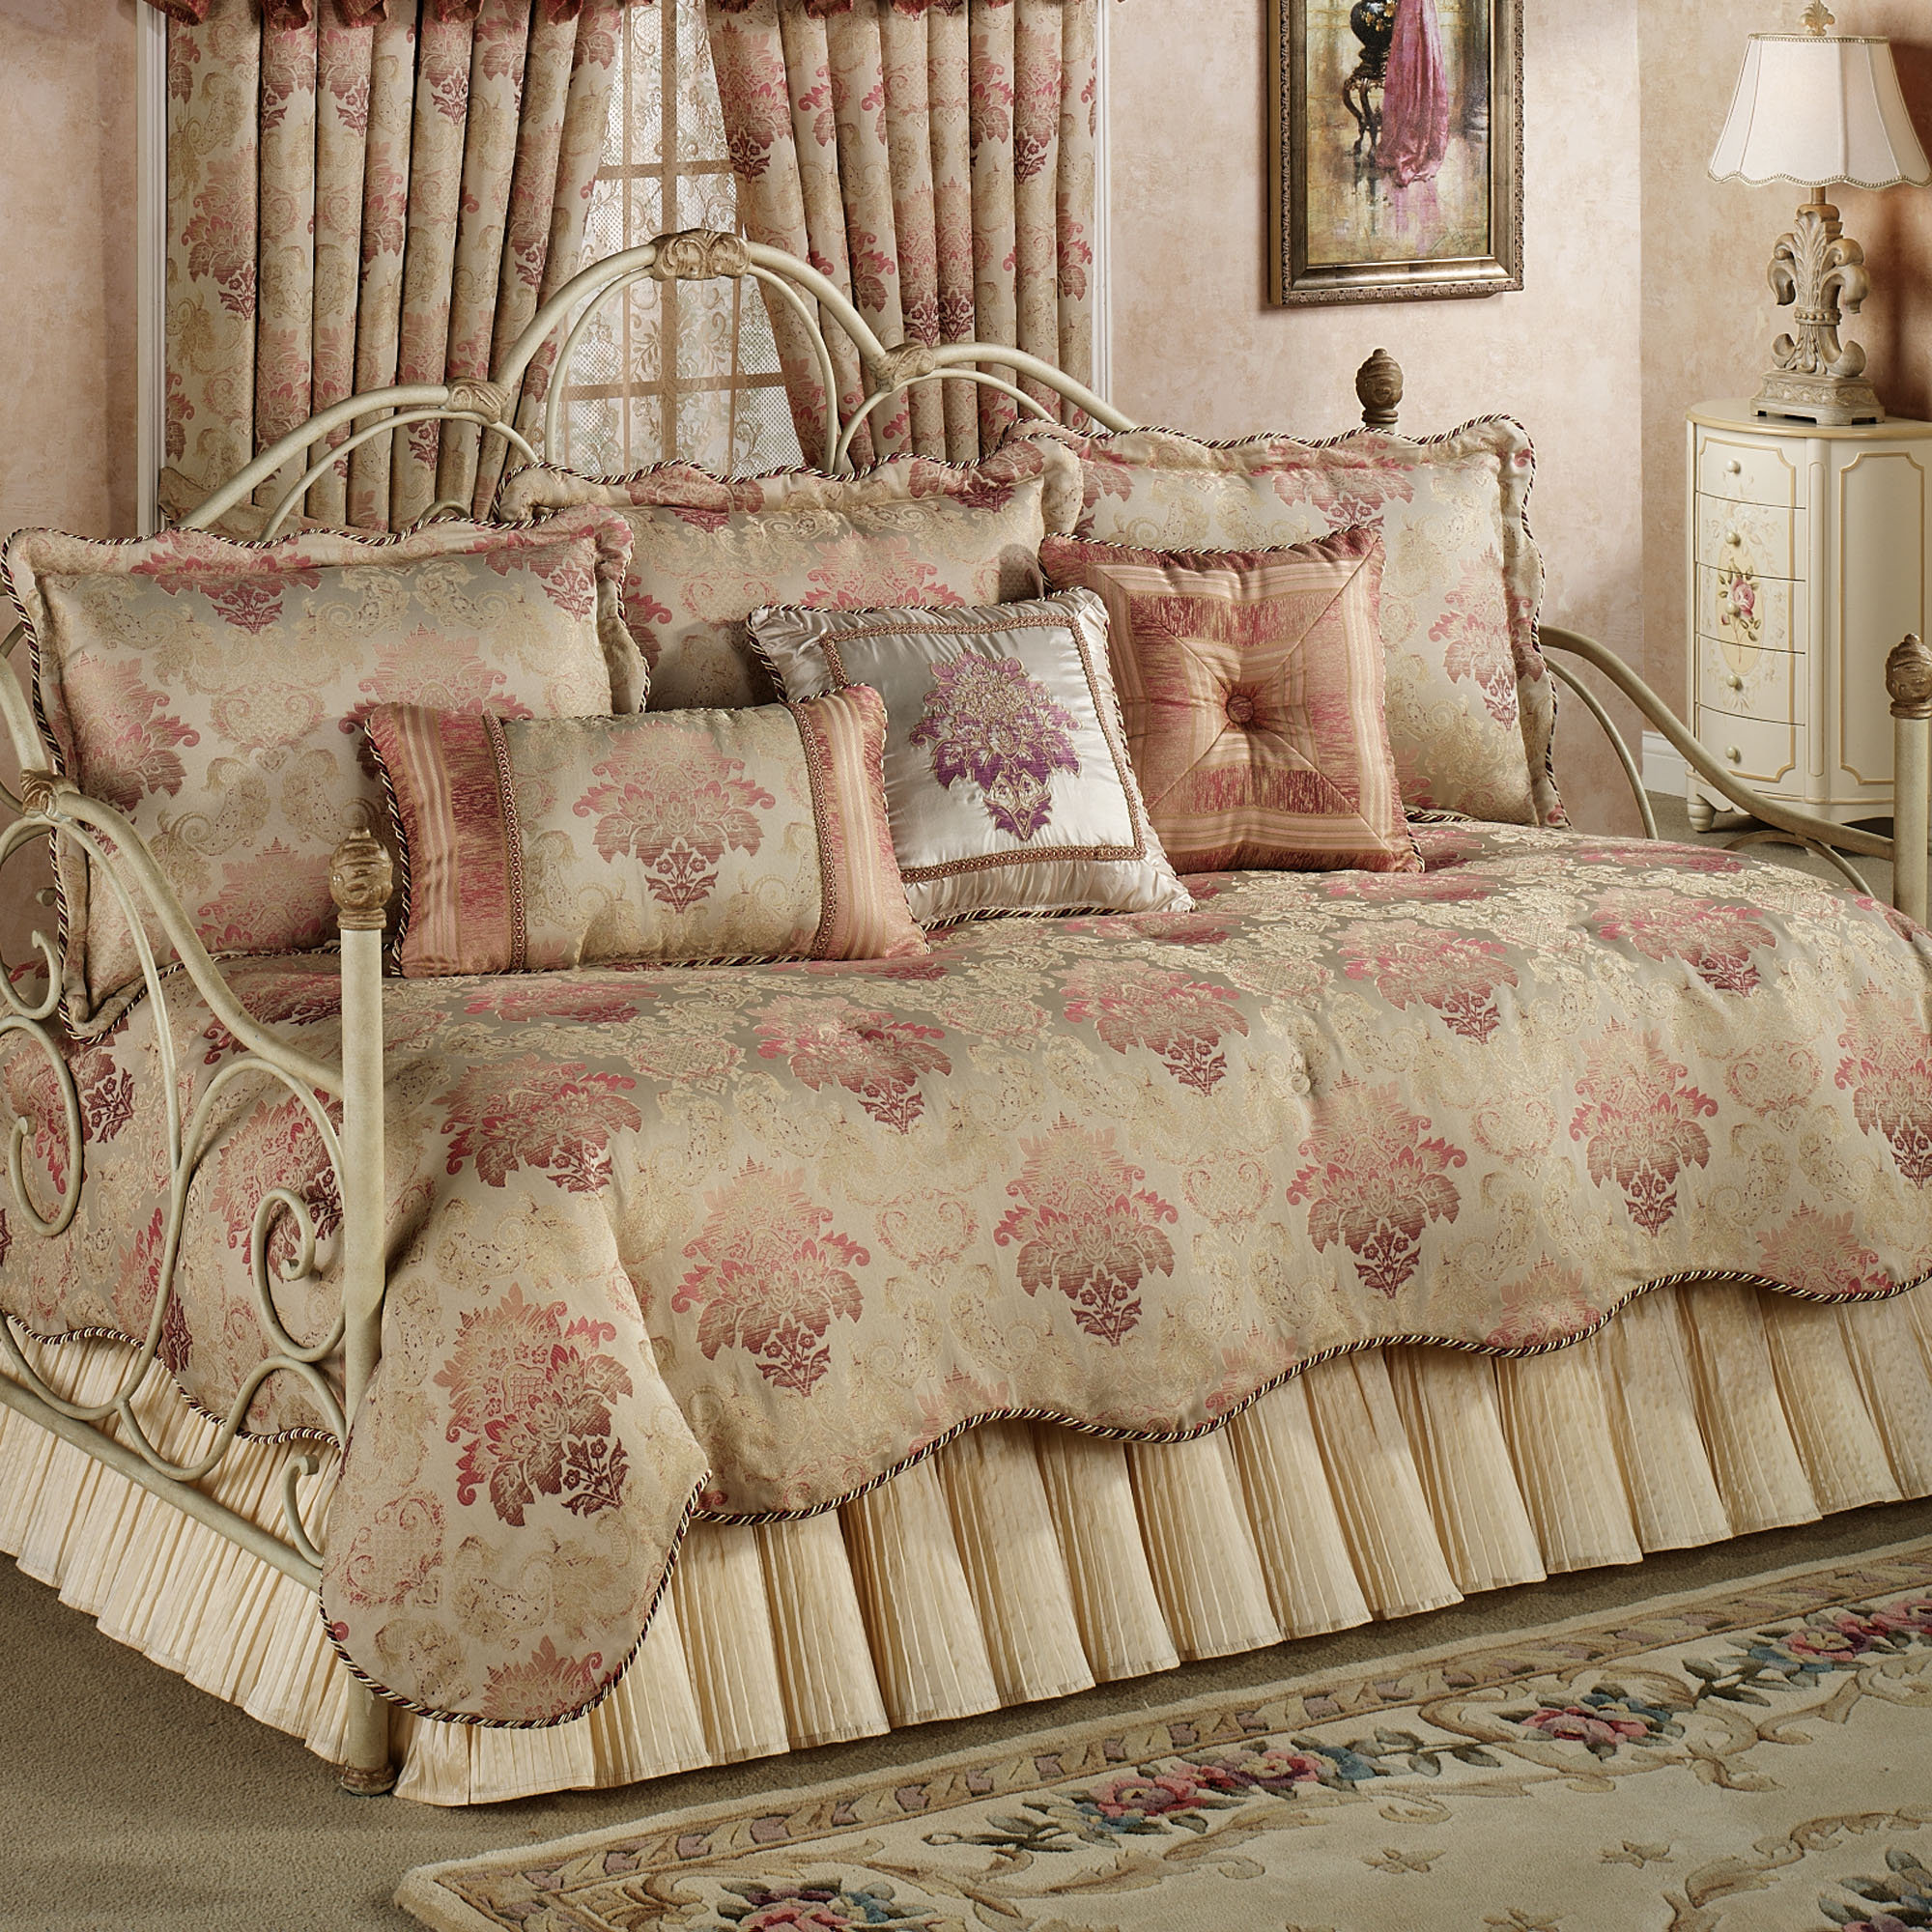 custom daybed bedding sets photo - 3